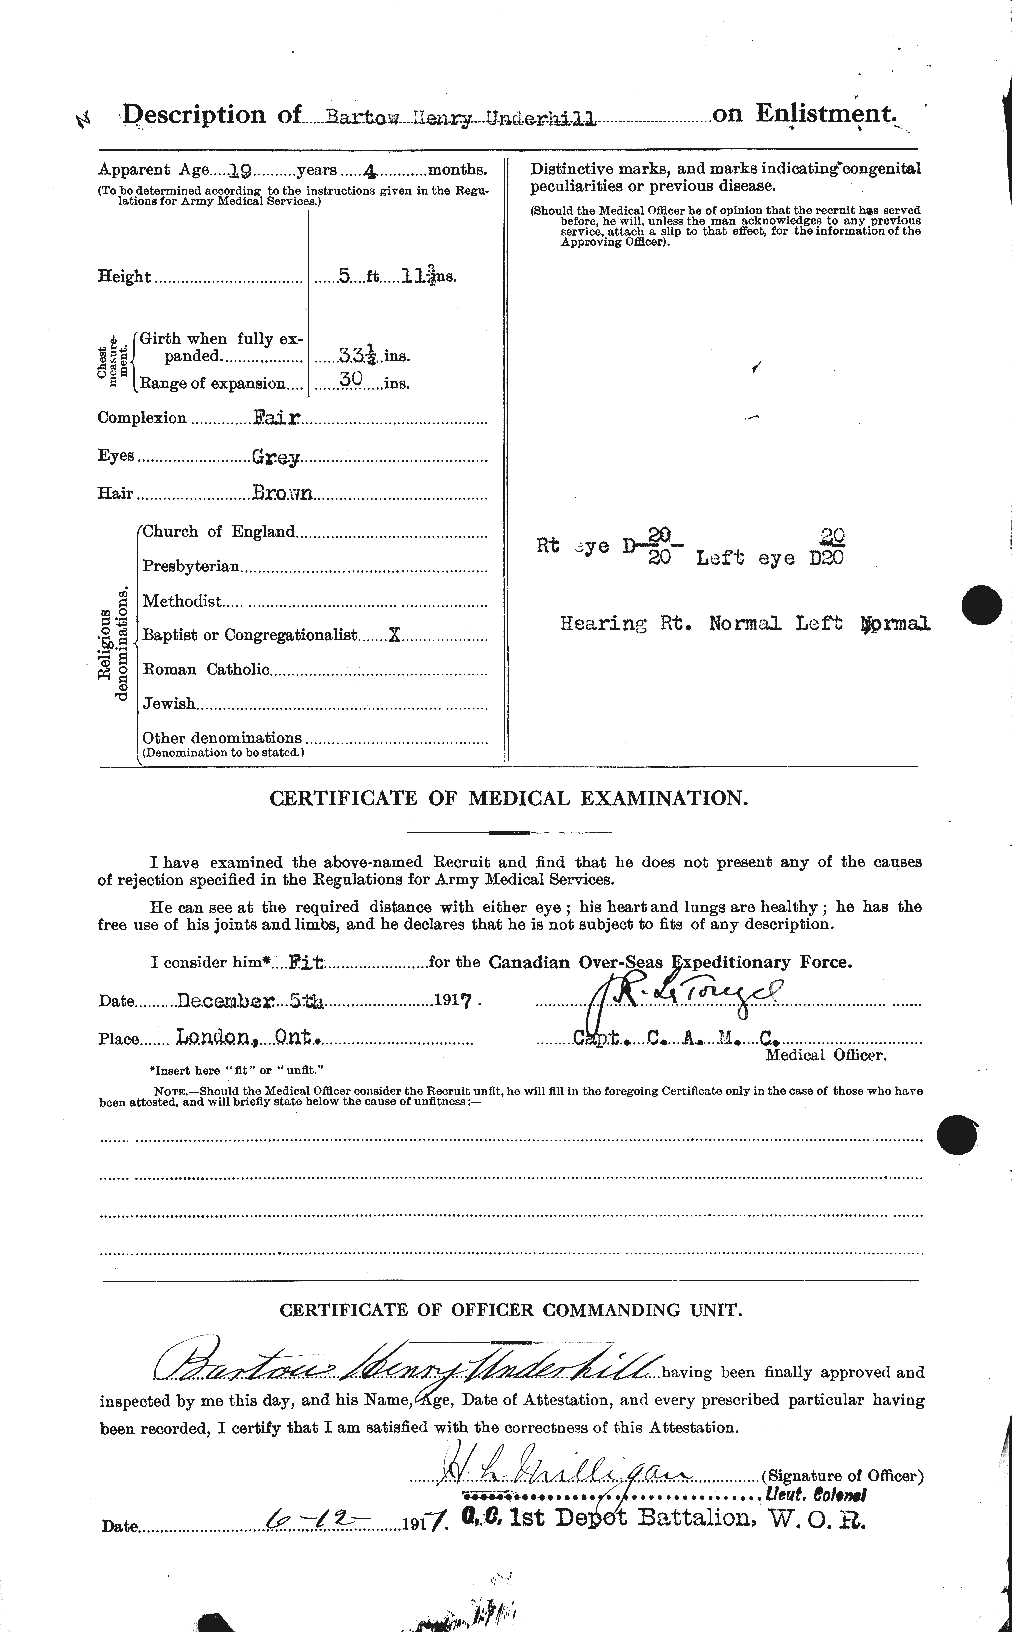 Personnel Records of the First World War - CEF 647075b